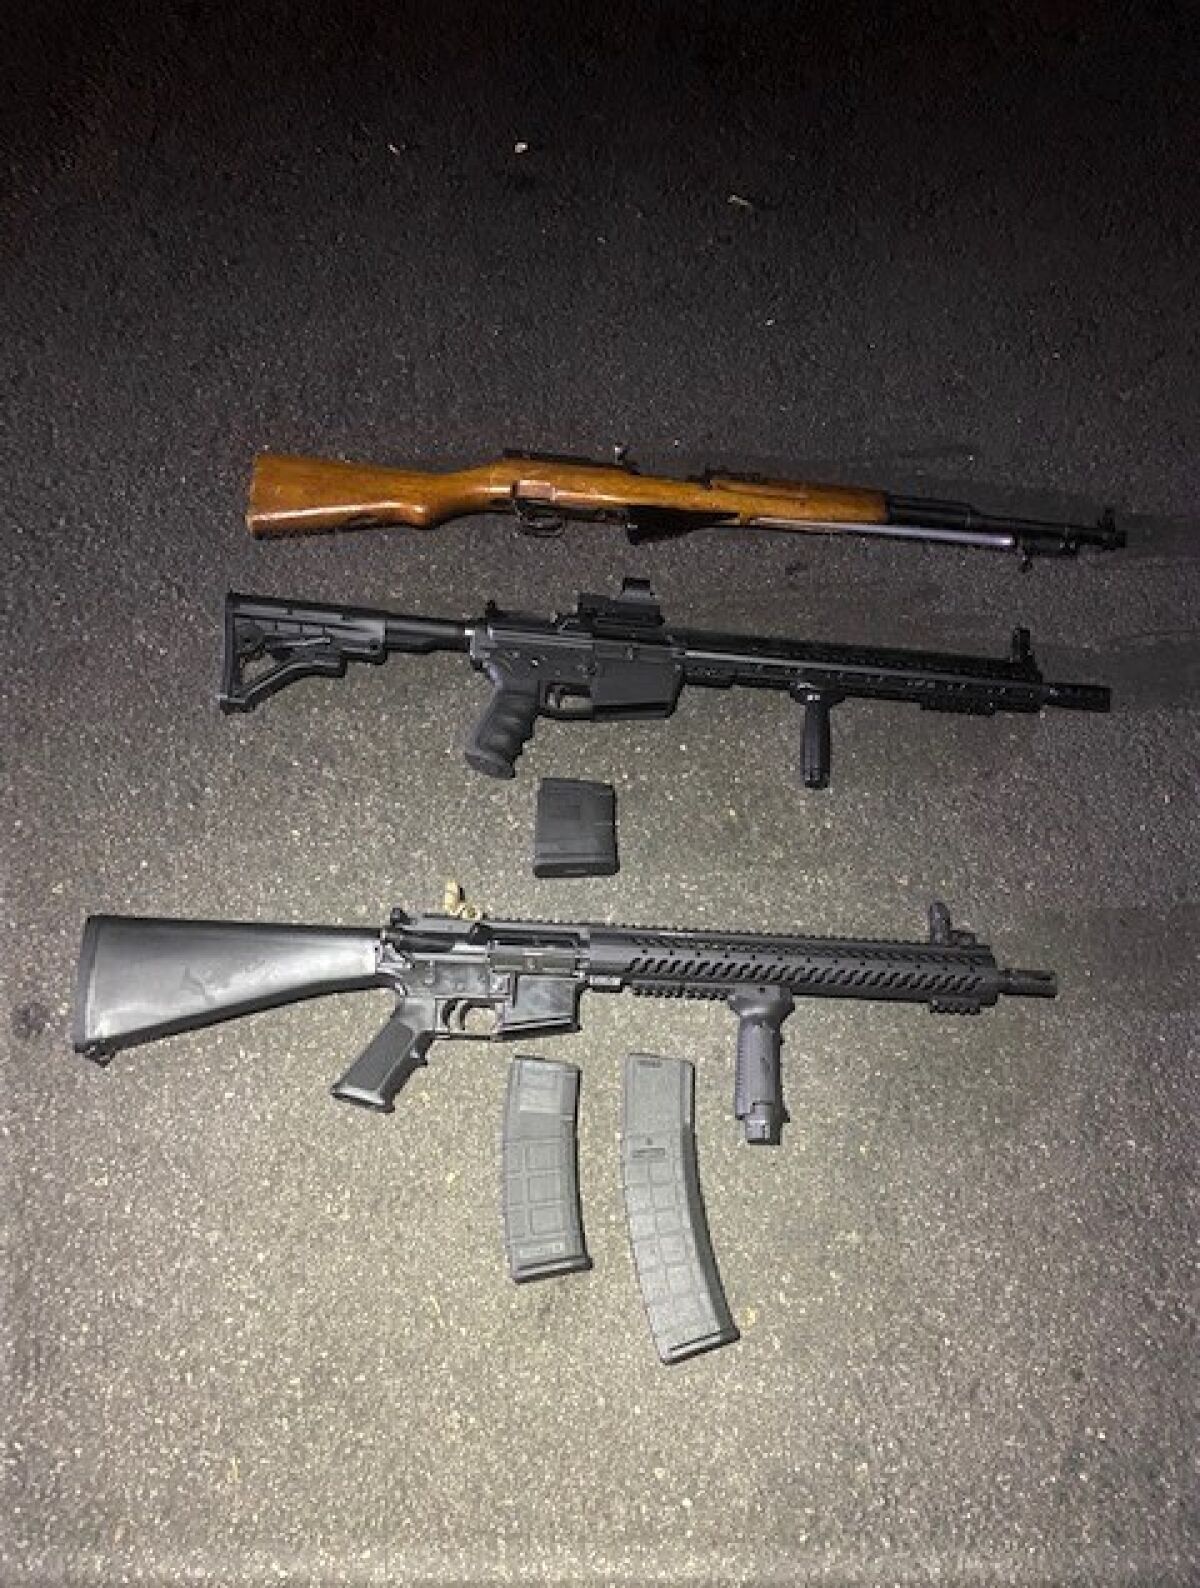 Seized firearms and assault weapons.